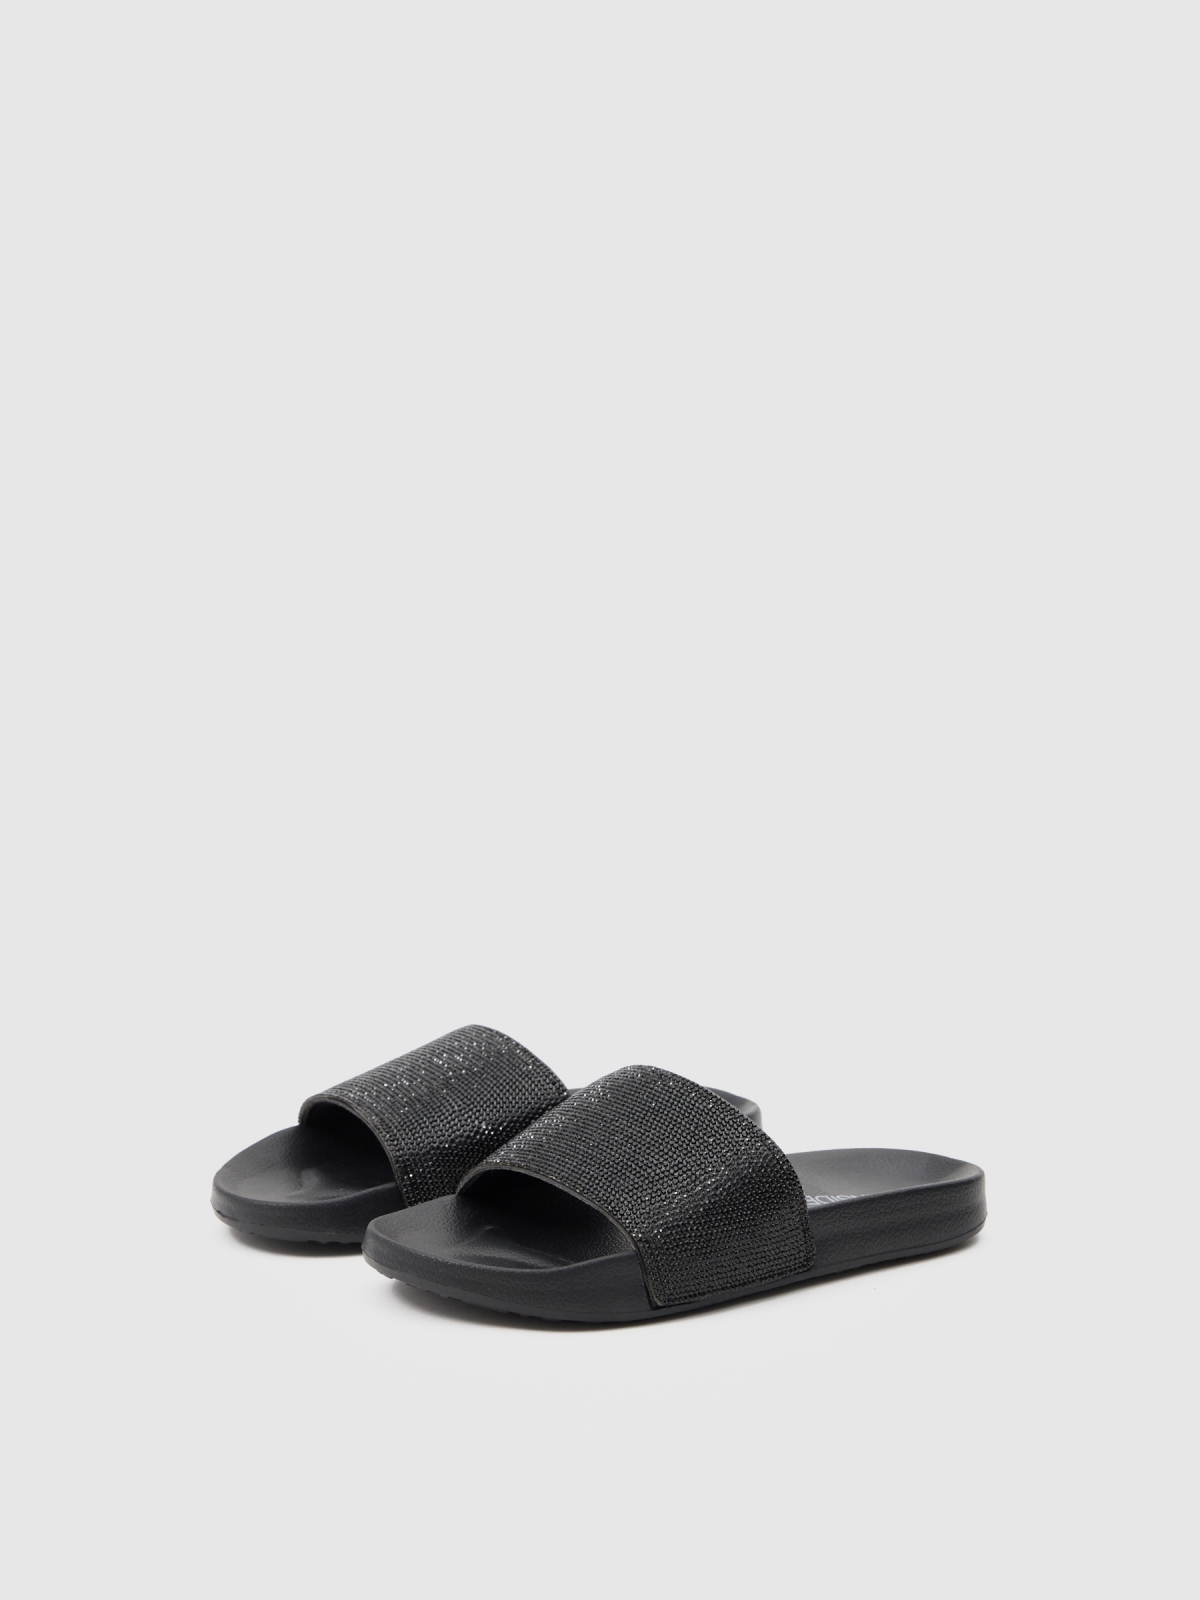 Strass flip flops black lateral view